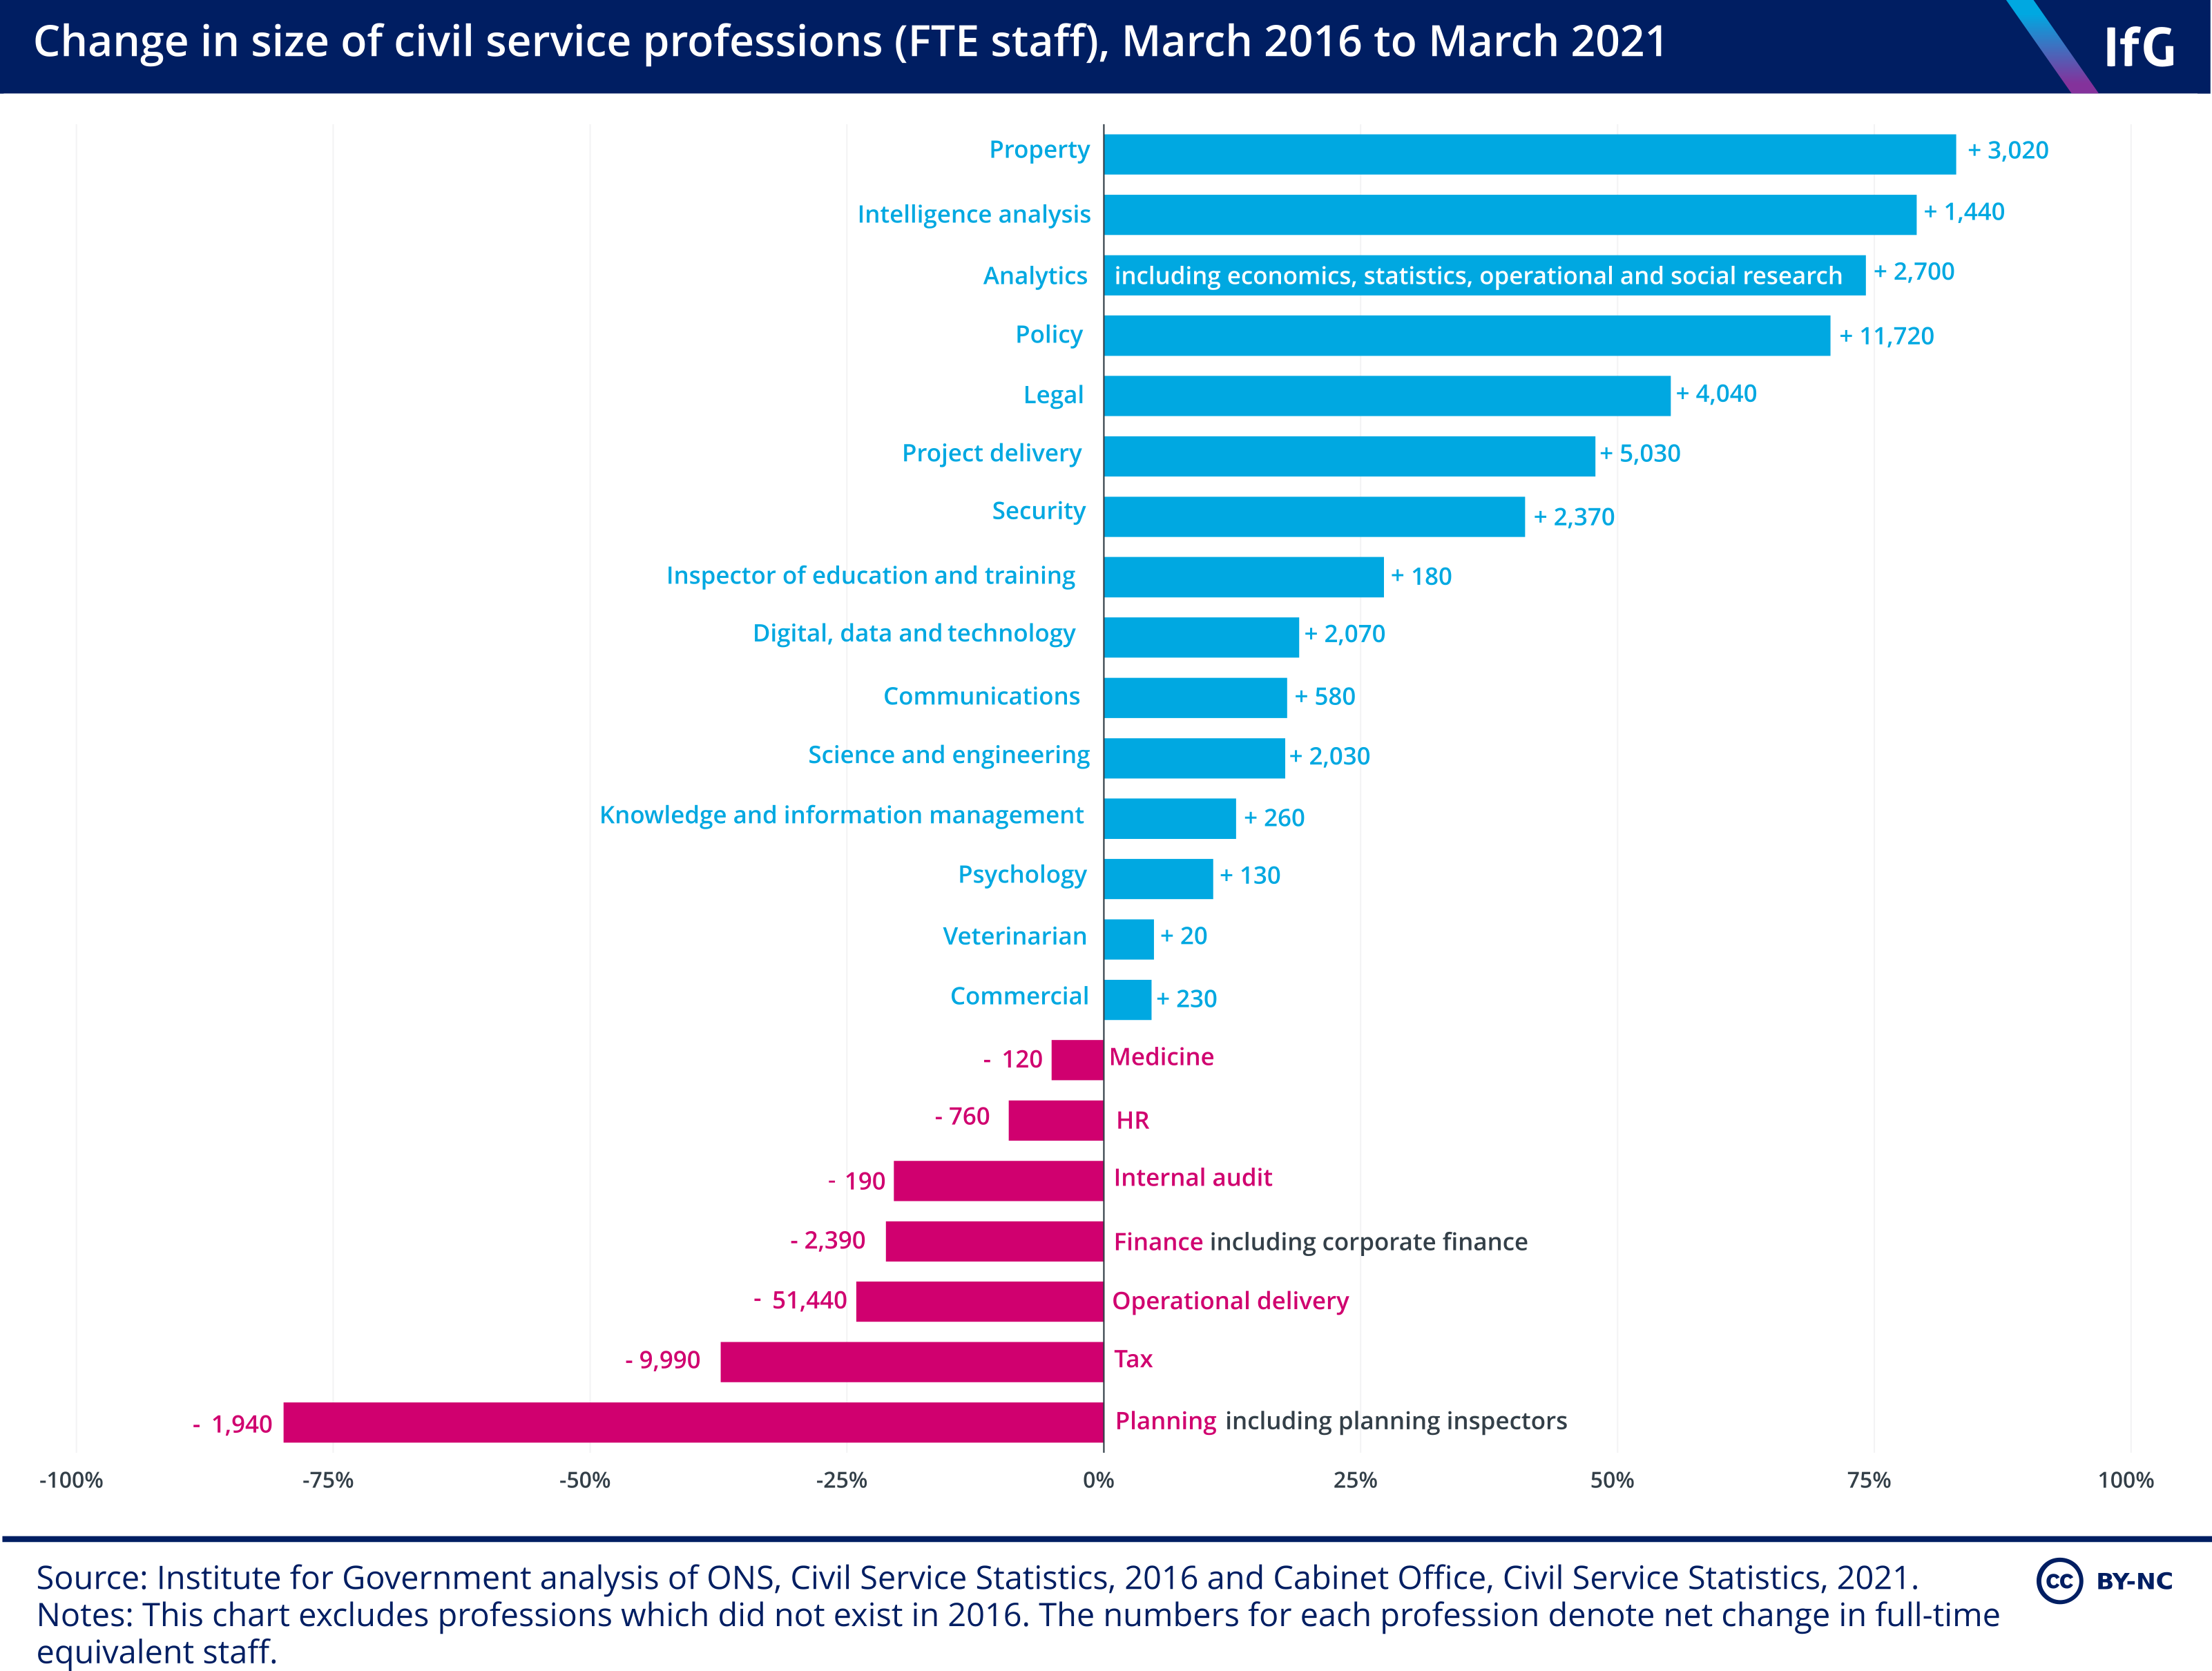 Change in the size of civil service professions